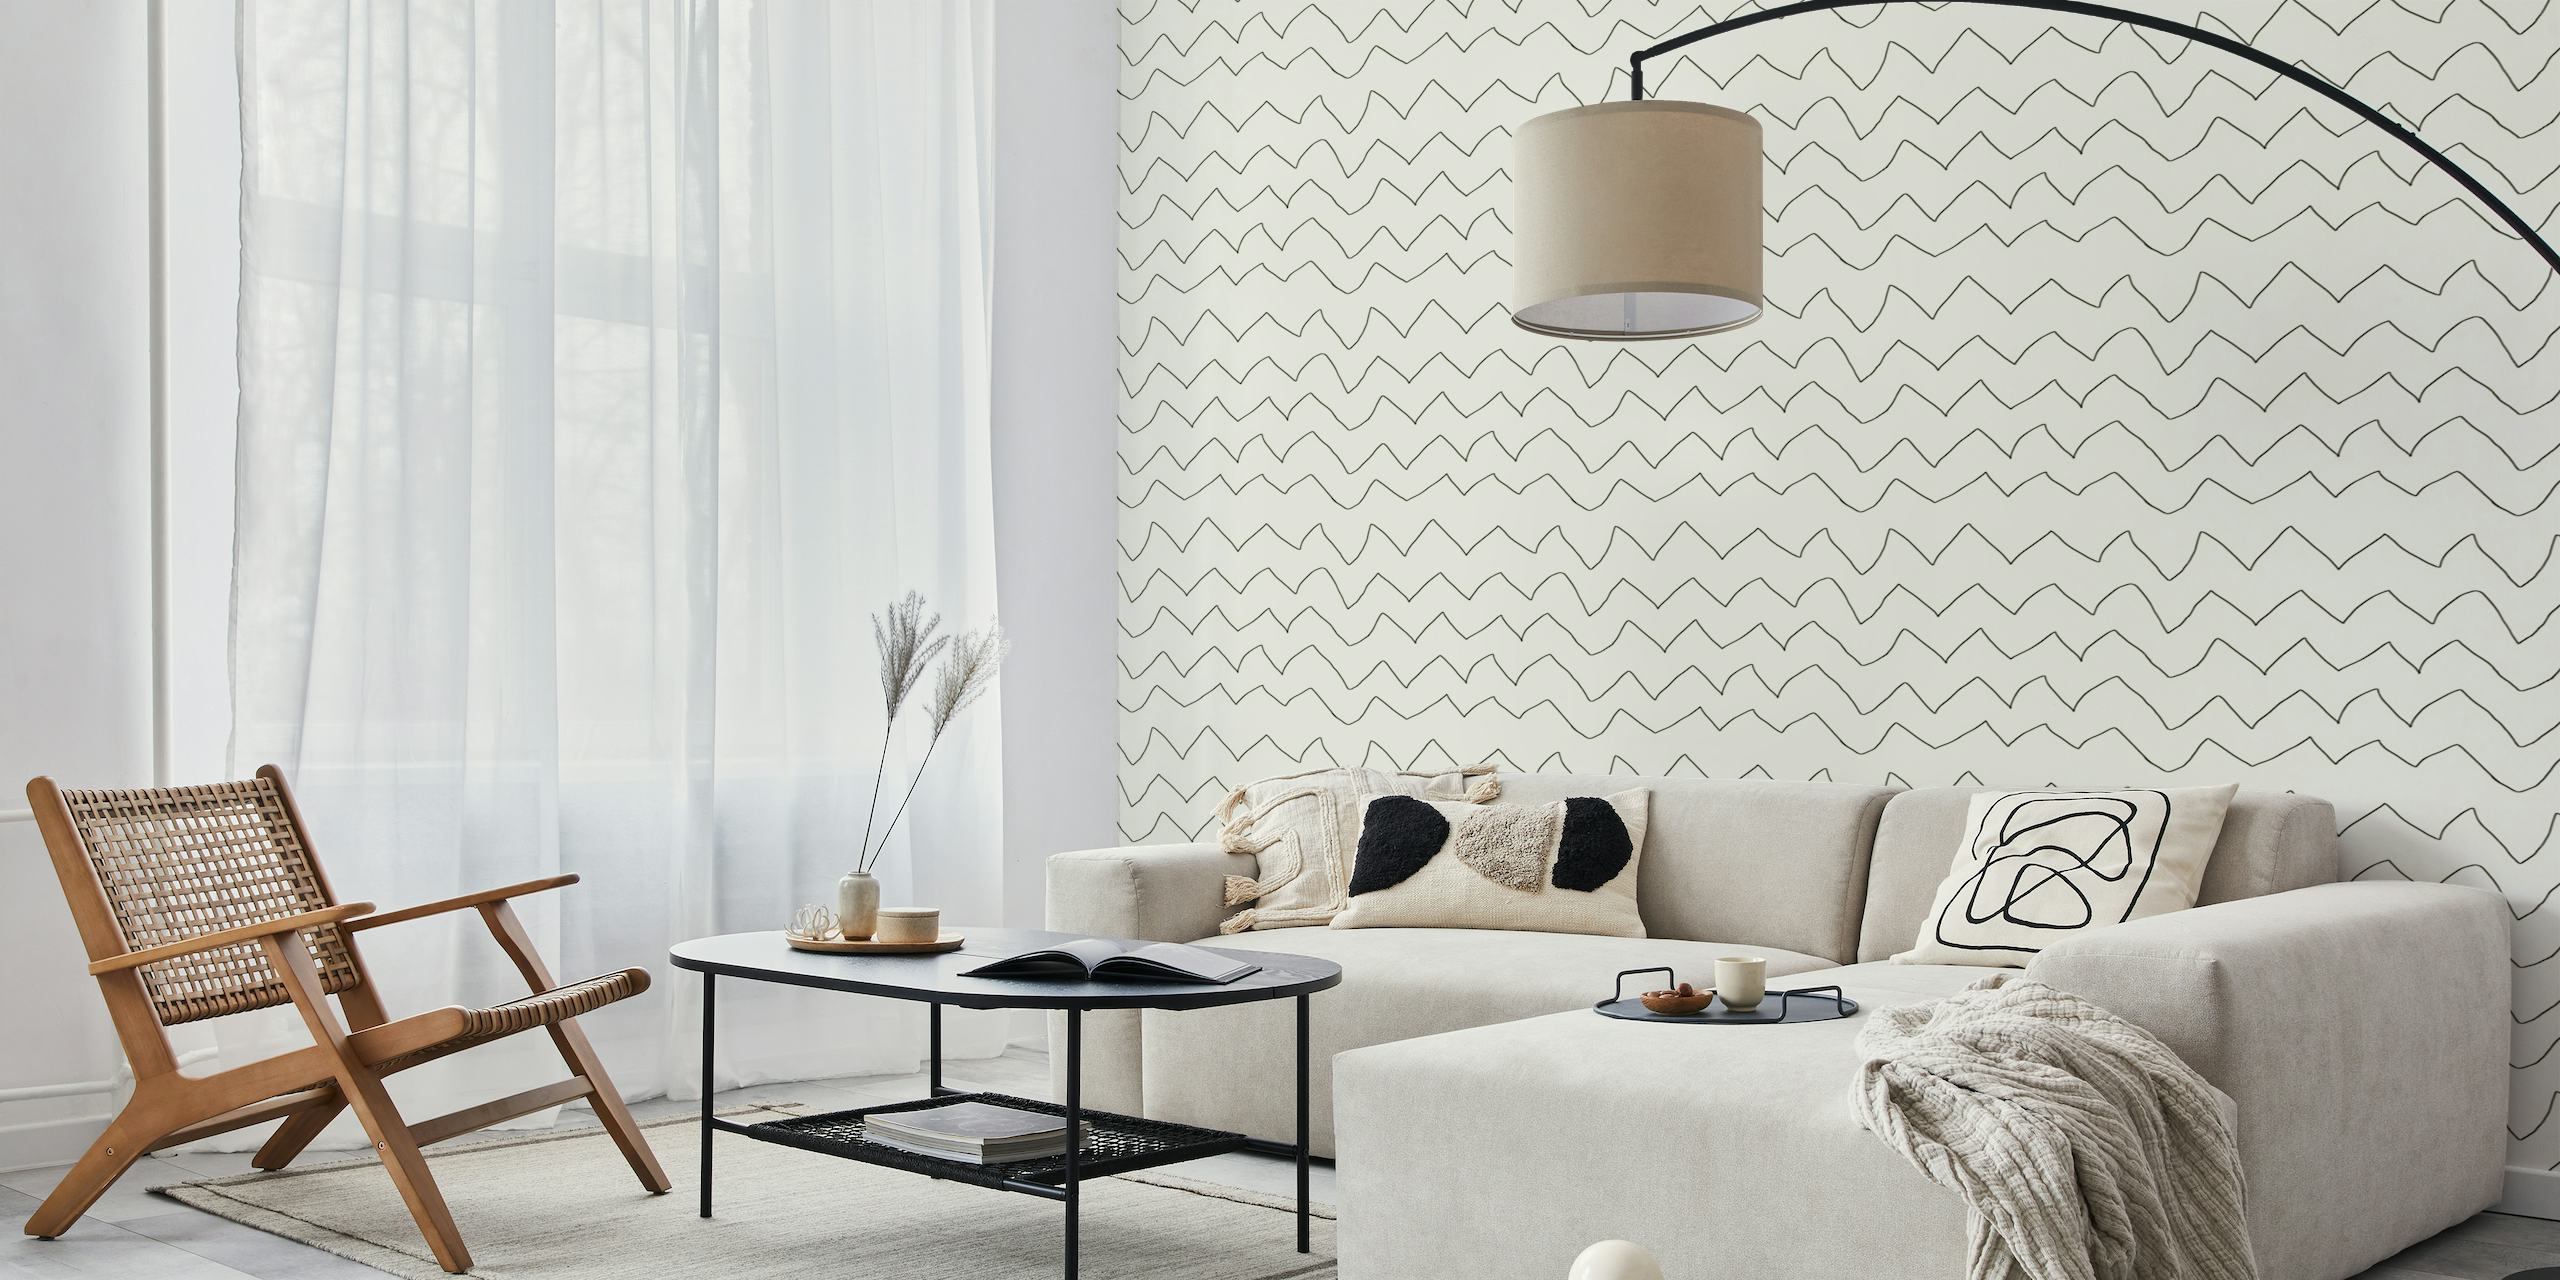 Zigzag black and white pattern wall mural from Happywall